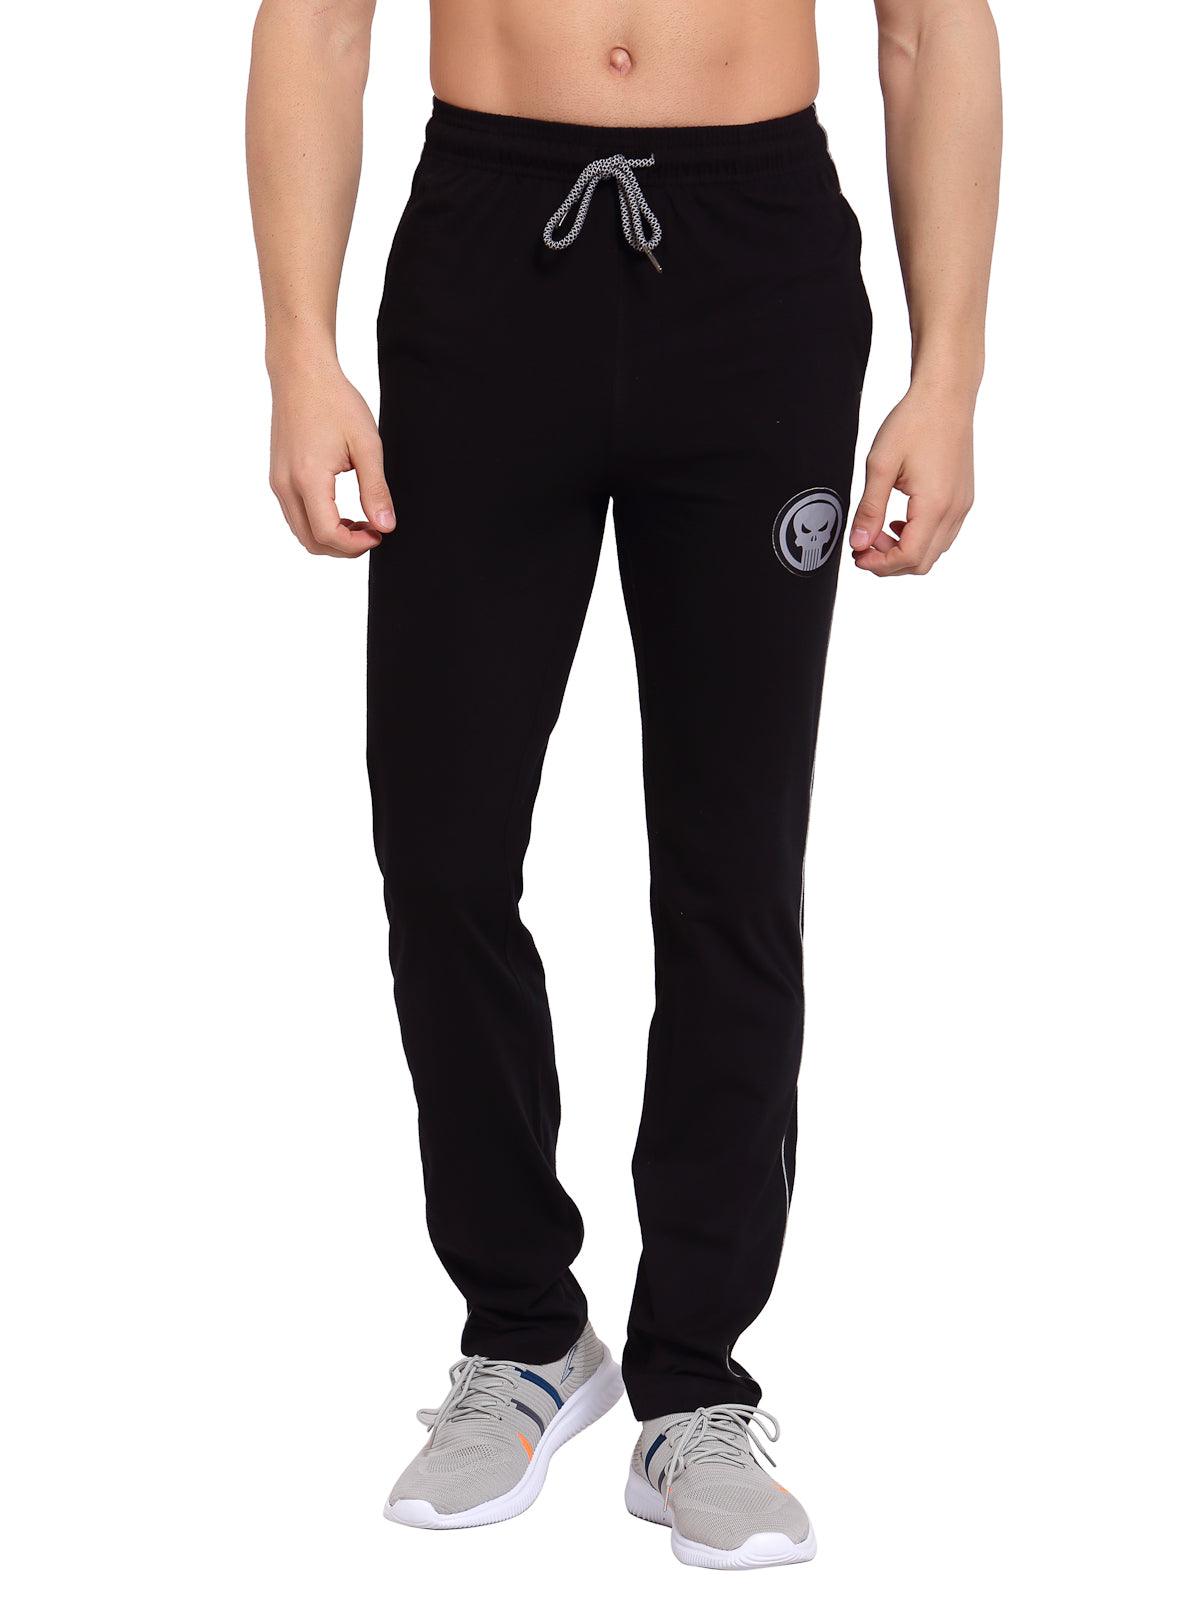 Jockey Track Pants Price in India | Track Pants Price List in India -  DTashion.com